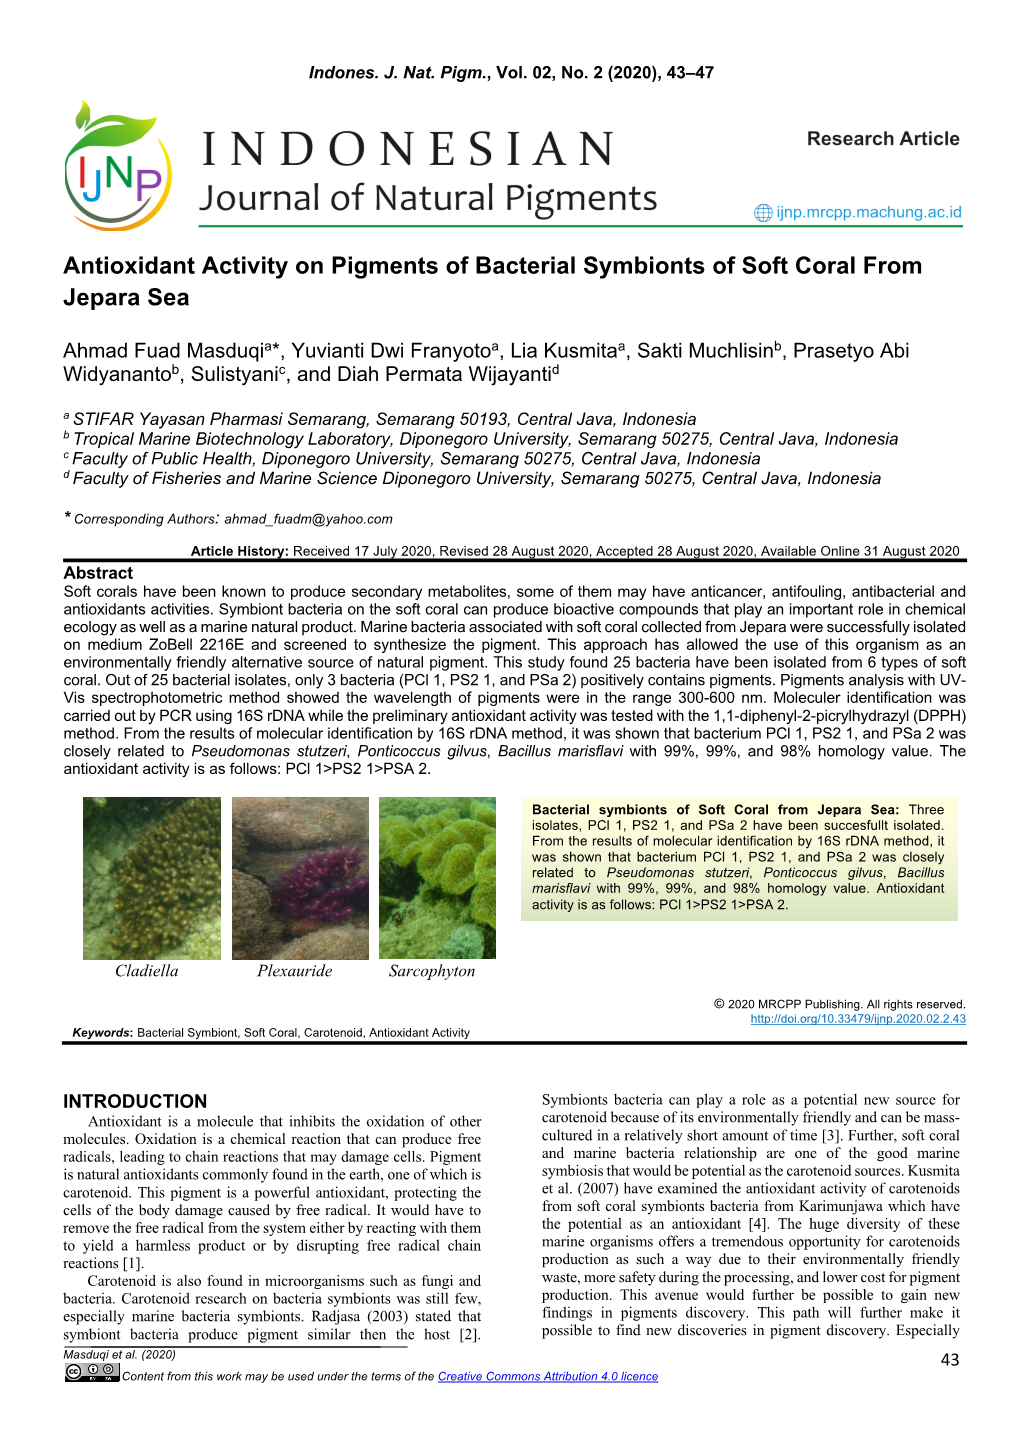 Antioxidant Activity on Pigments of Bacterial Symbionts of Soft Coral from Jepara Sea